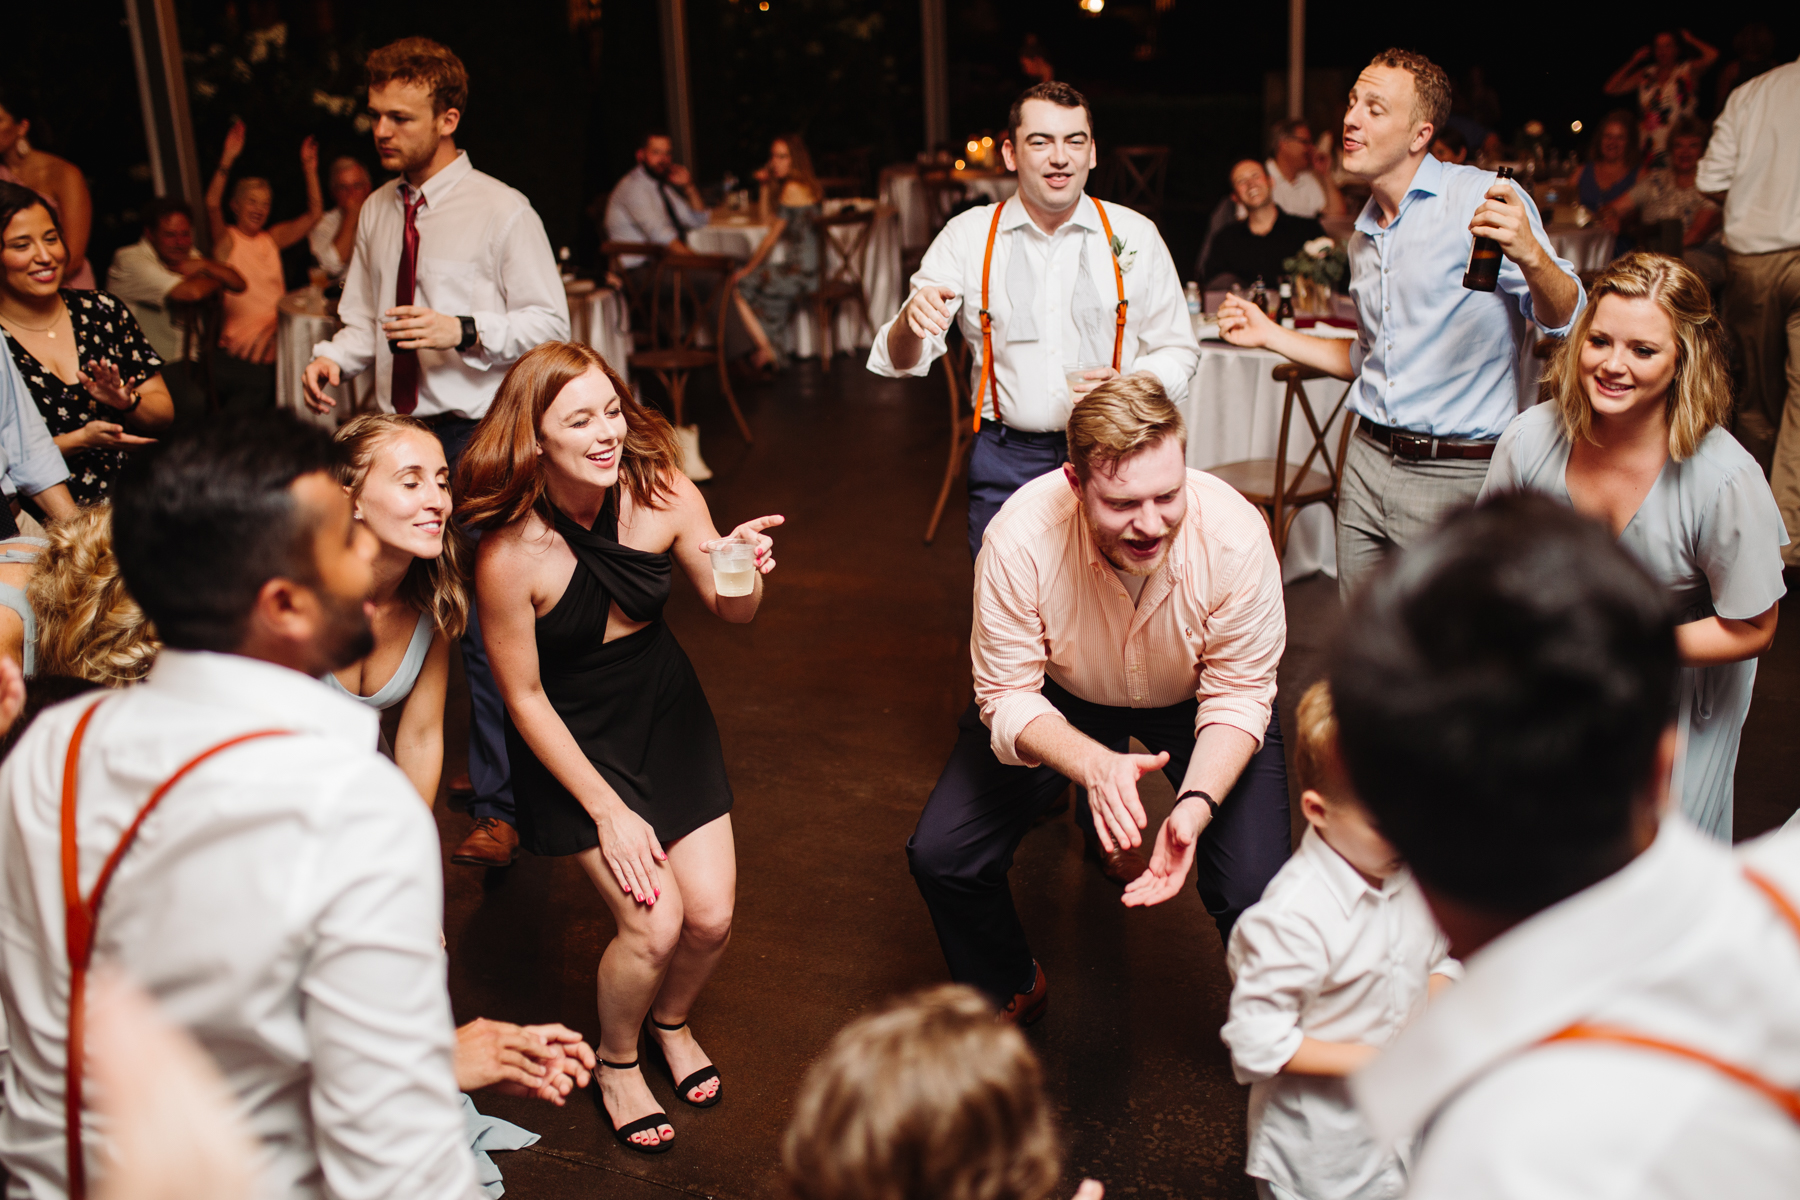 dance floor during the reception of a Sunny summer wedding at Dara's Garden in Knoxville, Tennessee 